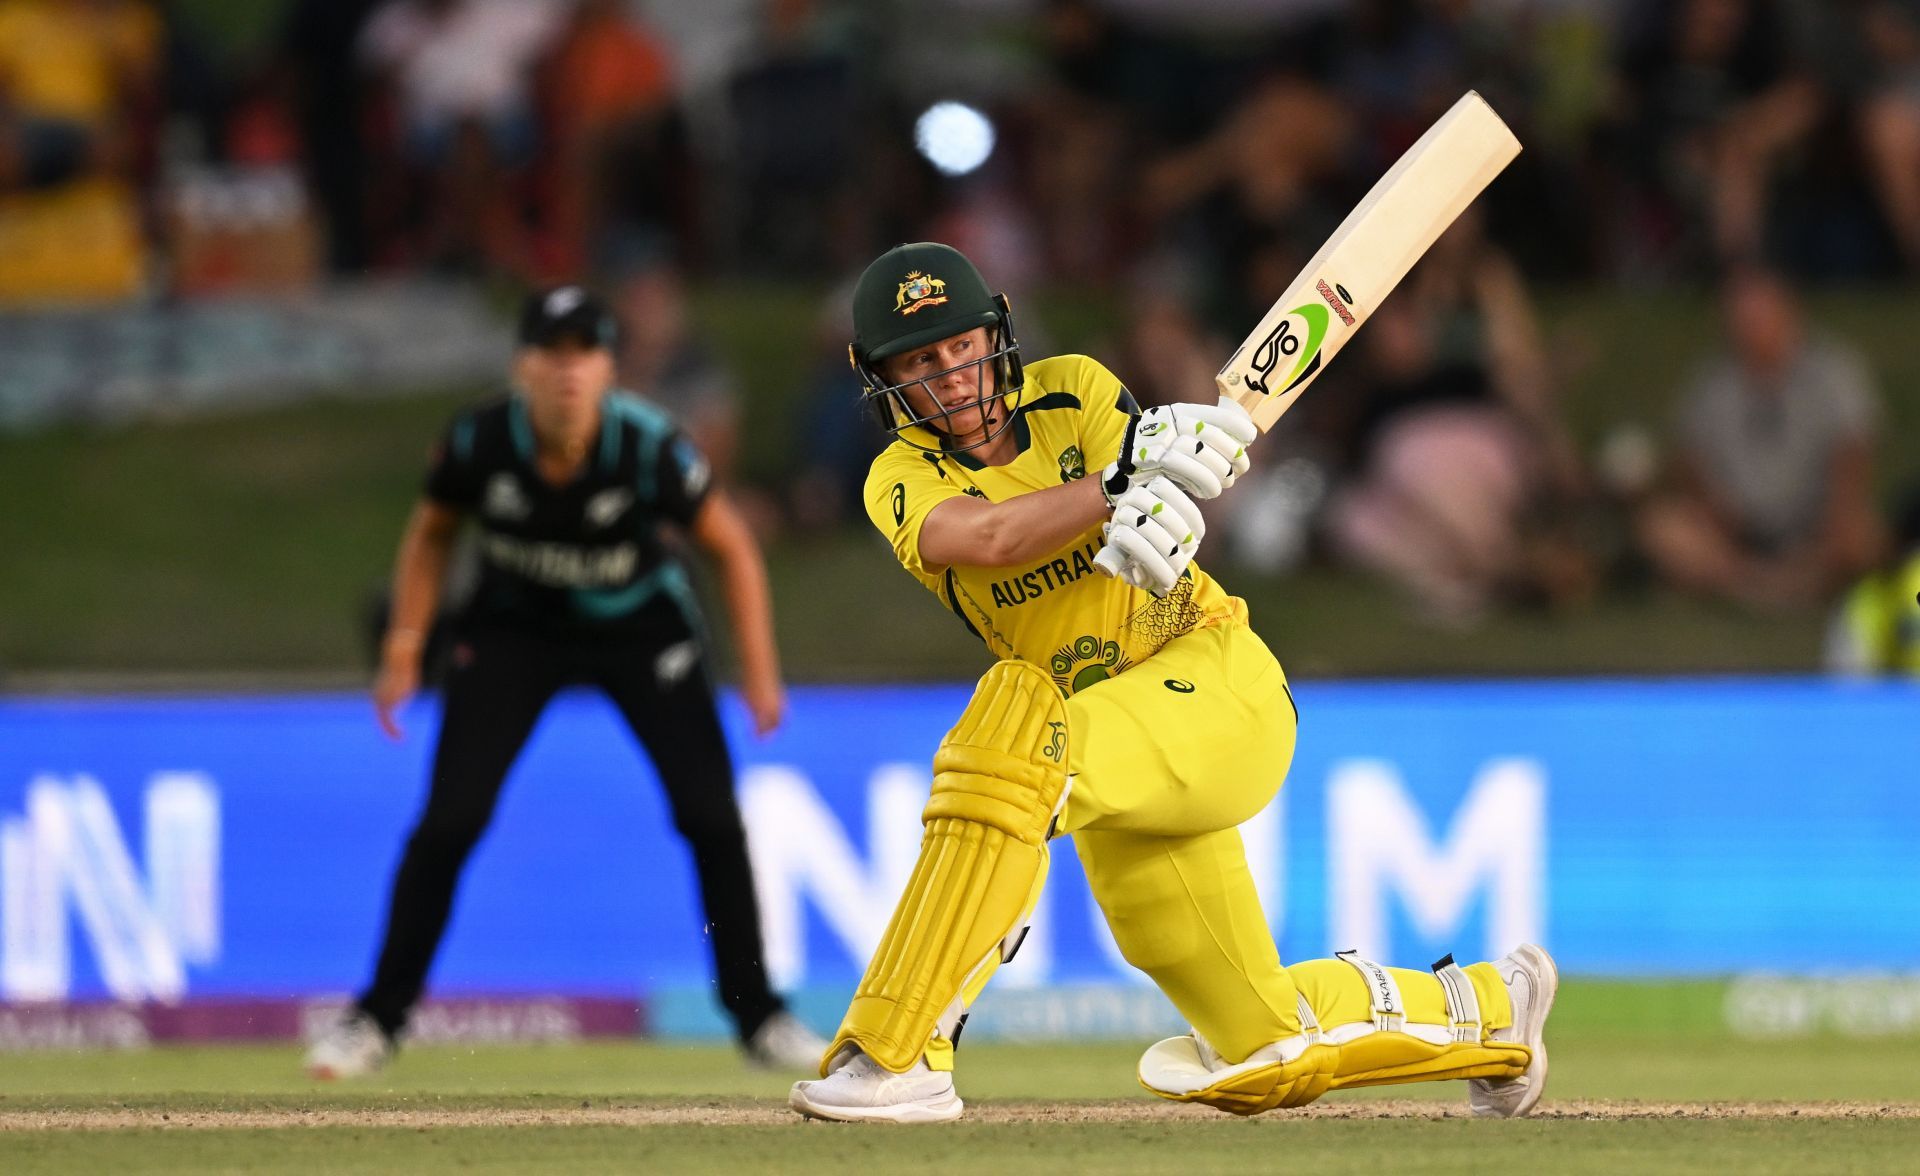 Alyssa Healy is one of the best female cricketers in the world